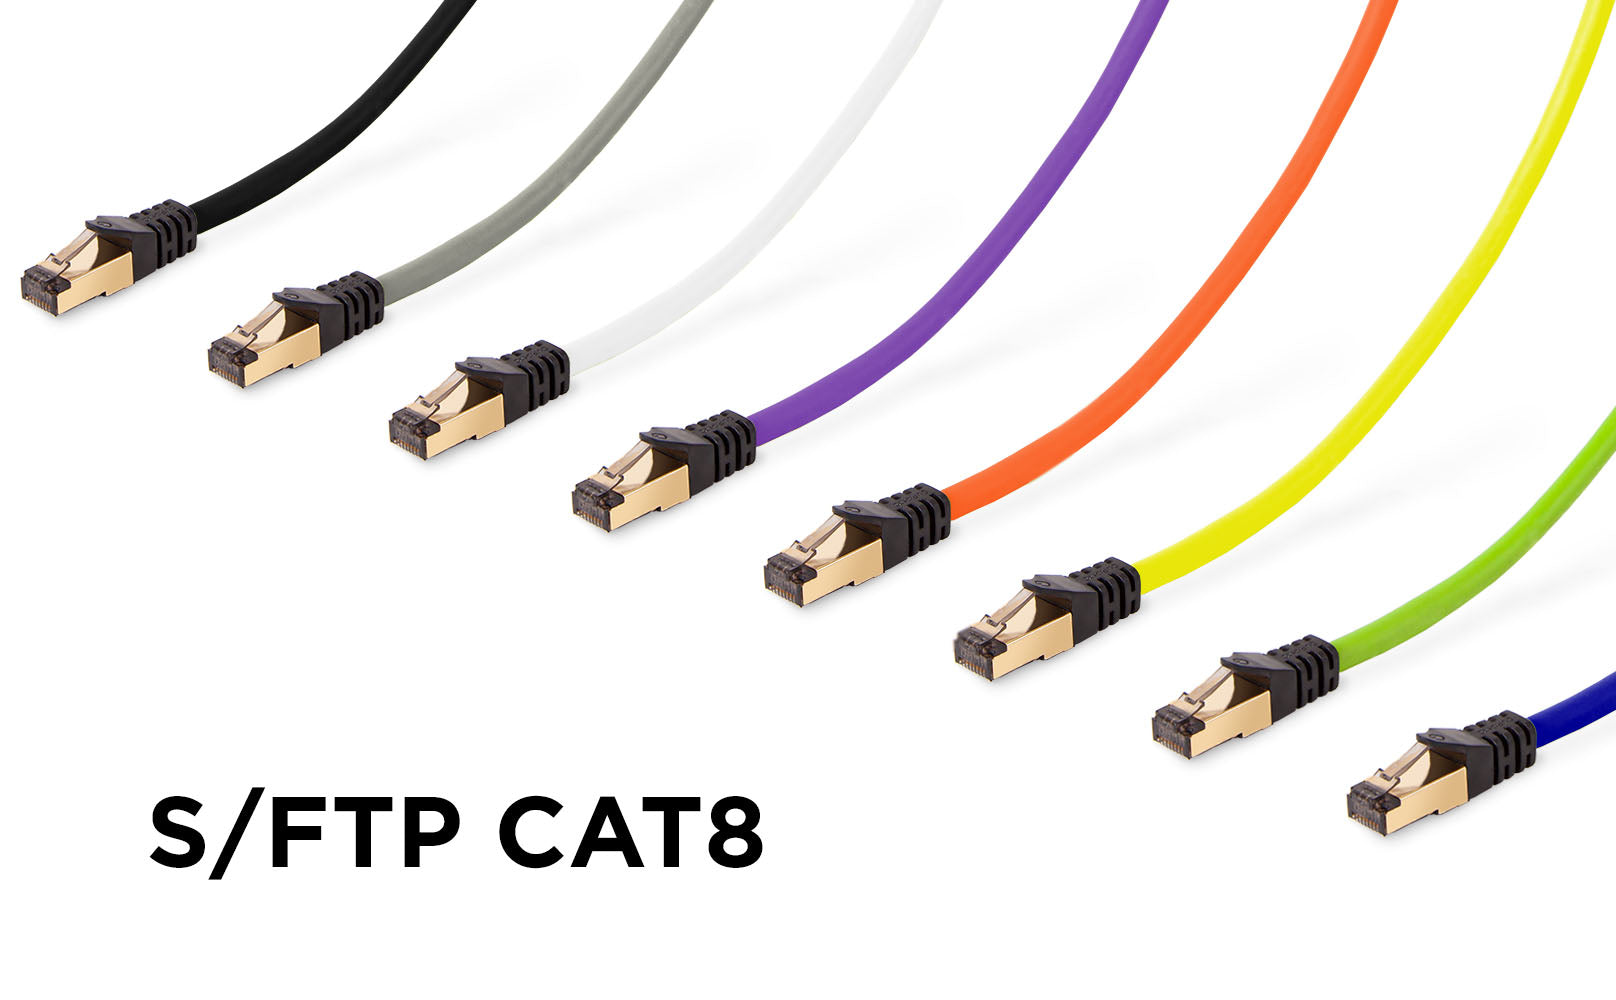 Duronic BK 1m Network Cable CAT6a Ethernet LAN Patch Cat 6 A RJ45 Wire  Gigabit FTP Gold Headed Shielded - High Speed 600MHz Premium Quality, Modem